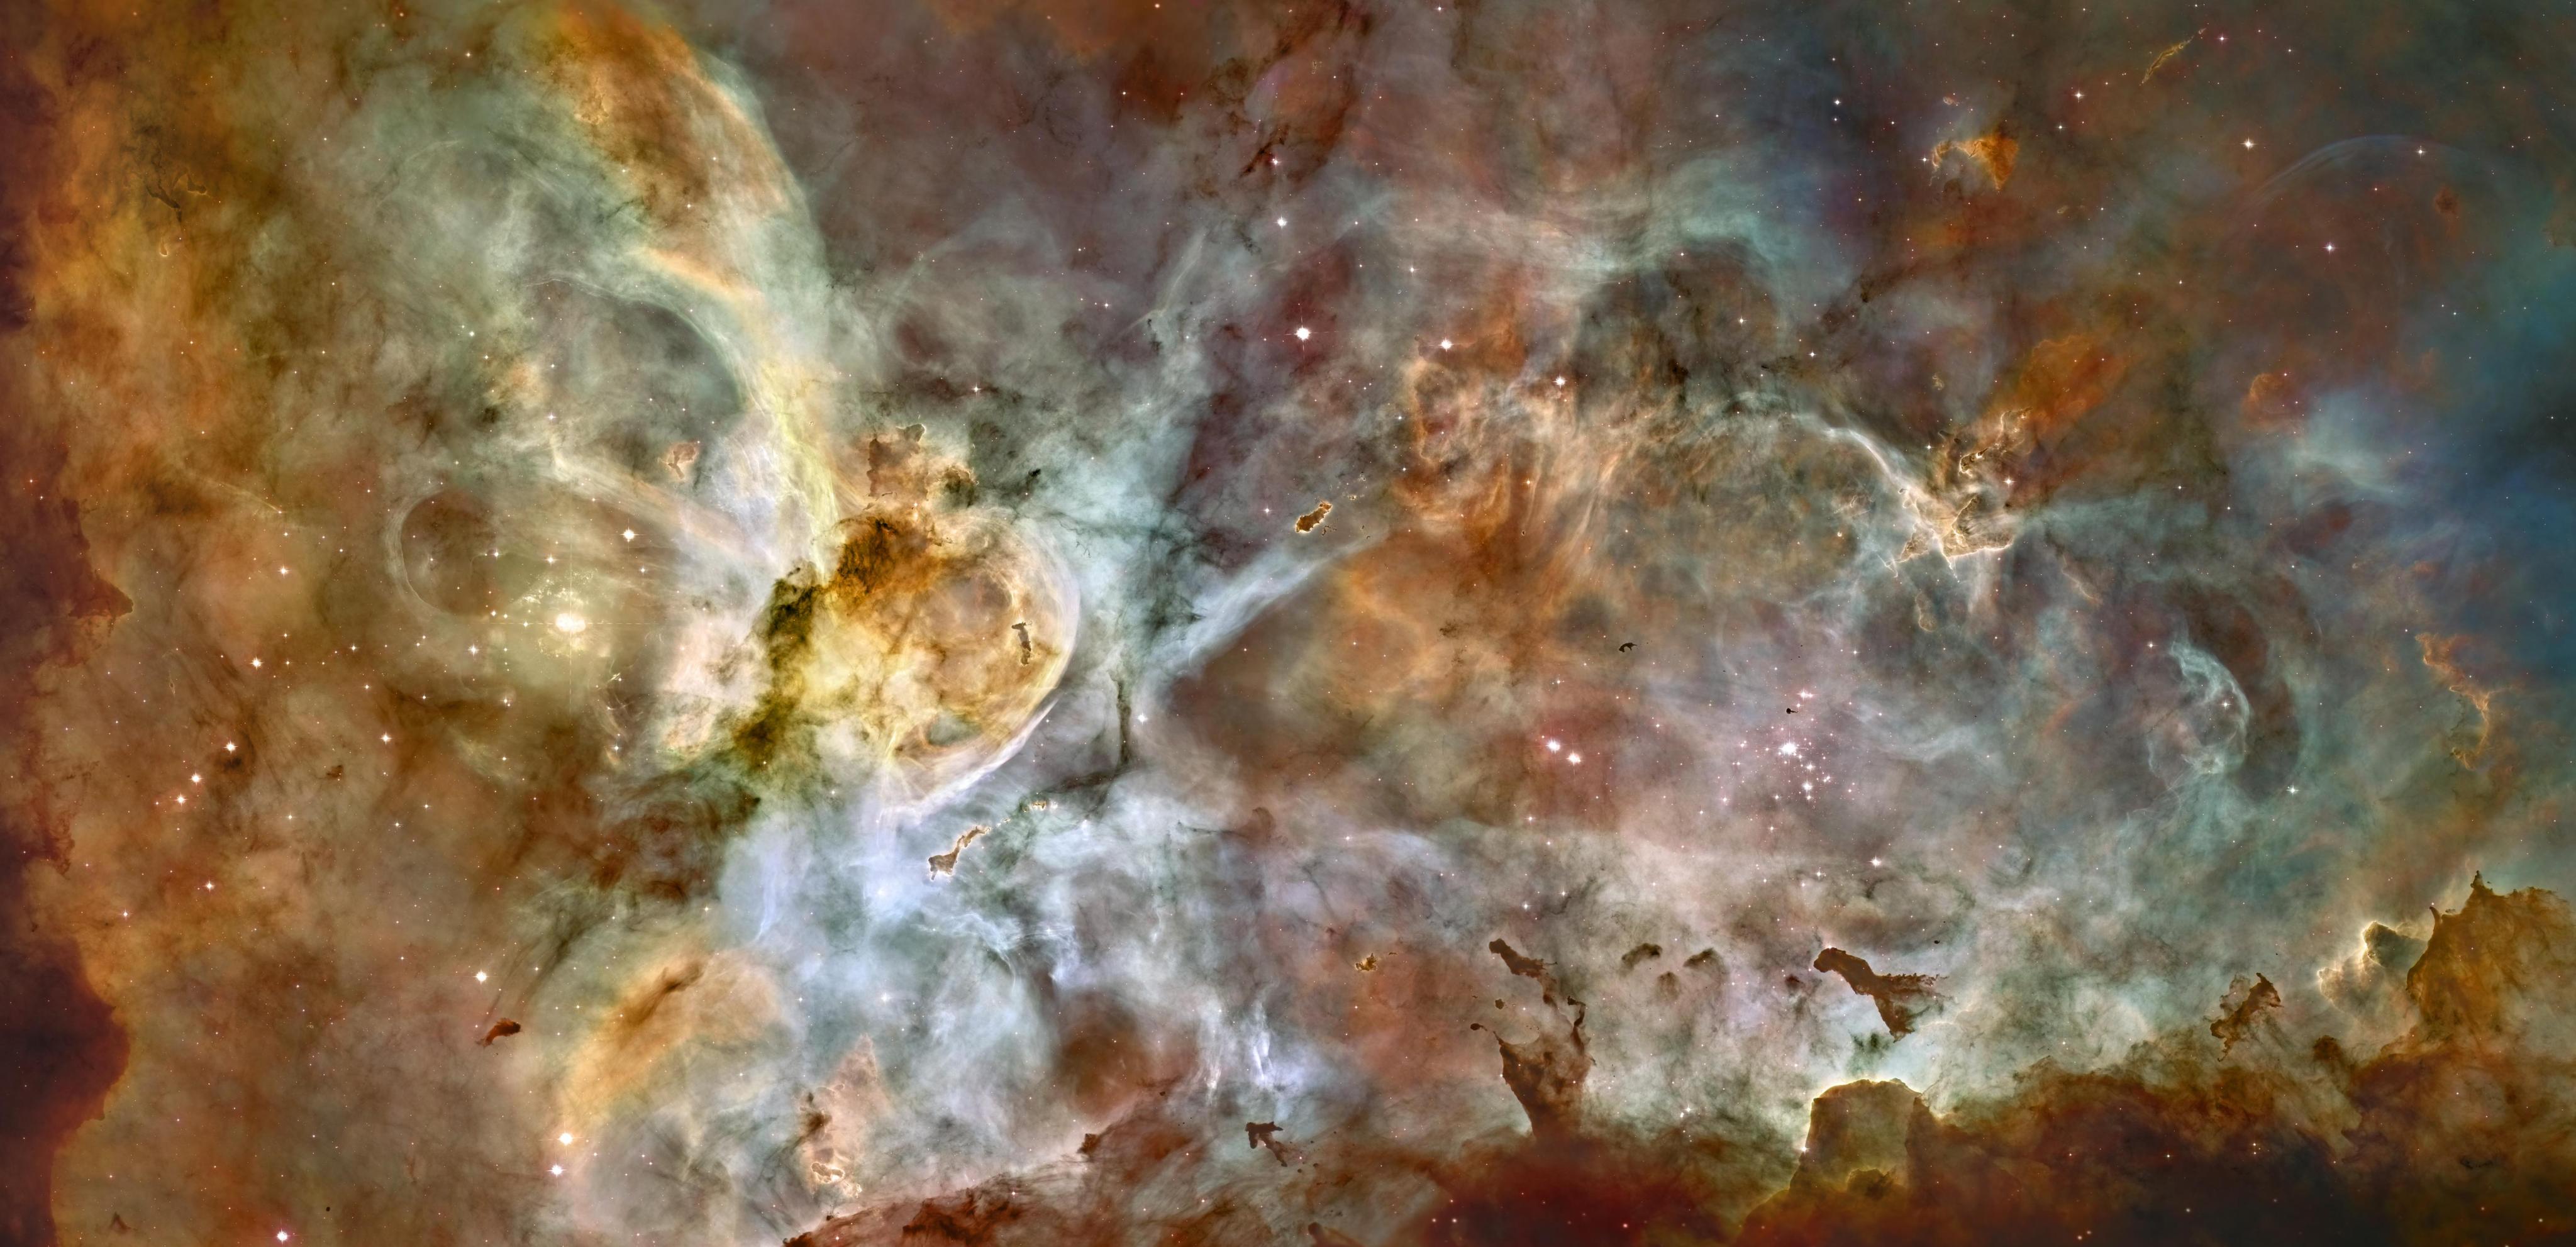 Swirls and knots of colorful gases and dark dust clouds fill the entire image, with bright clusters of stars sprinkled throughout.